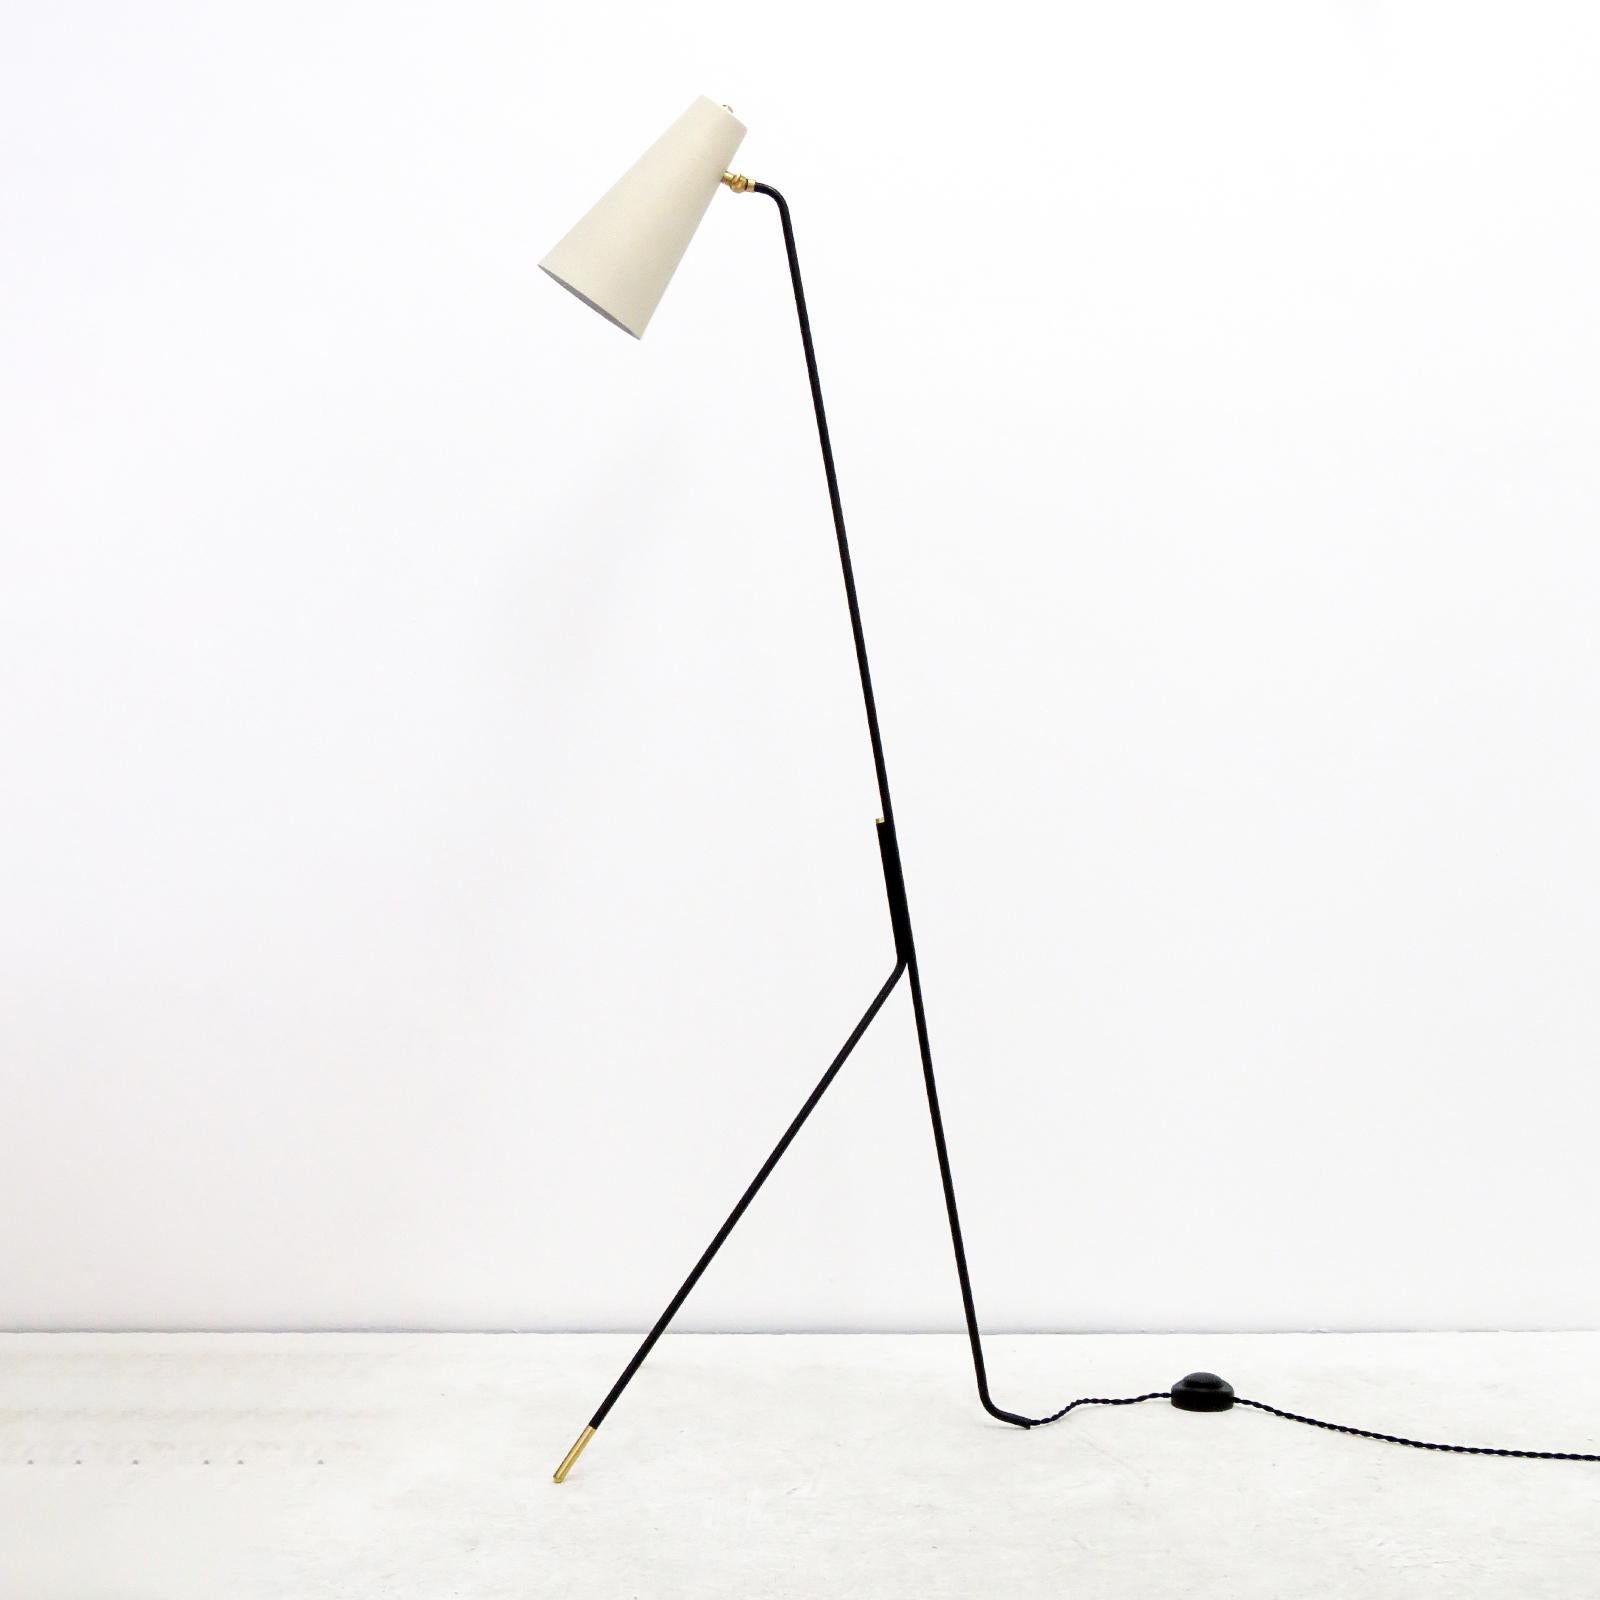 Wonderful minimalist tripod floor lamp by Gallery L7, handcrafted and finished in Los Angeles, black powder coated frame with brass accents and egg shell colored large conical shade. One E26 socket per lamp, max. wattage 75w each or 3-7w LED